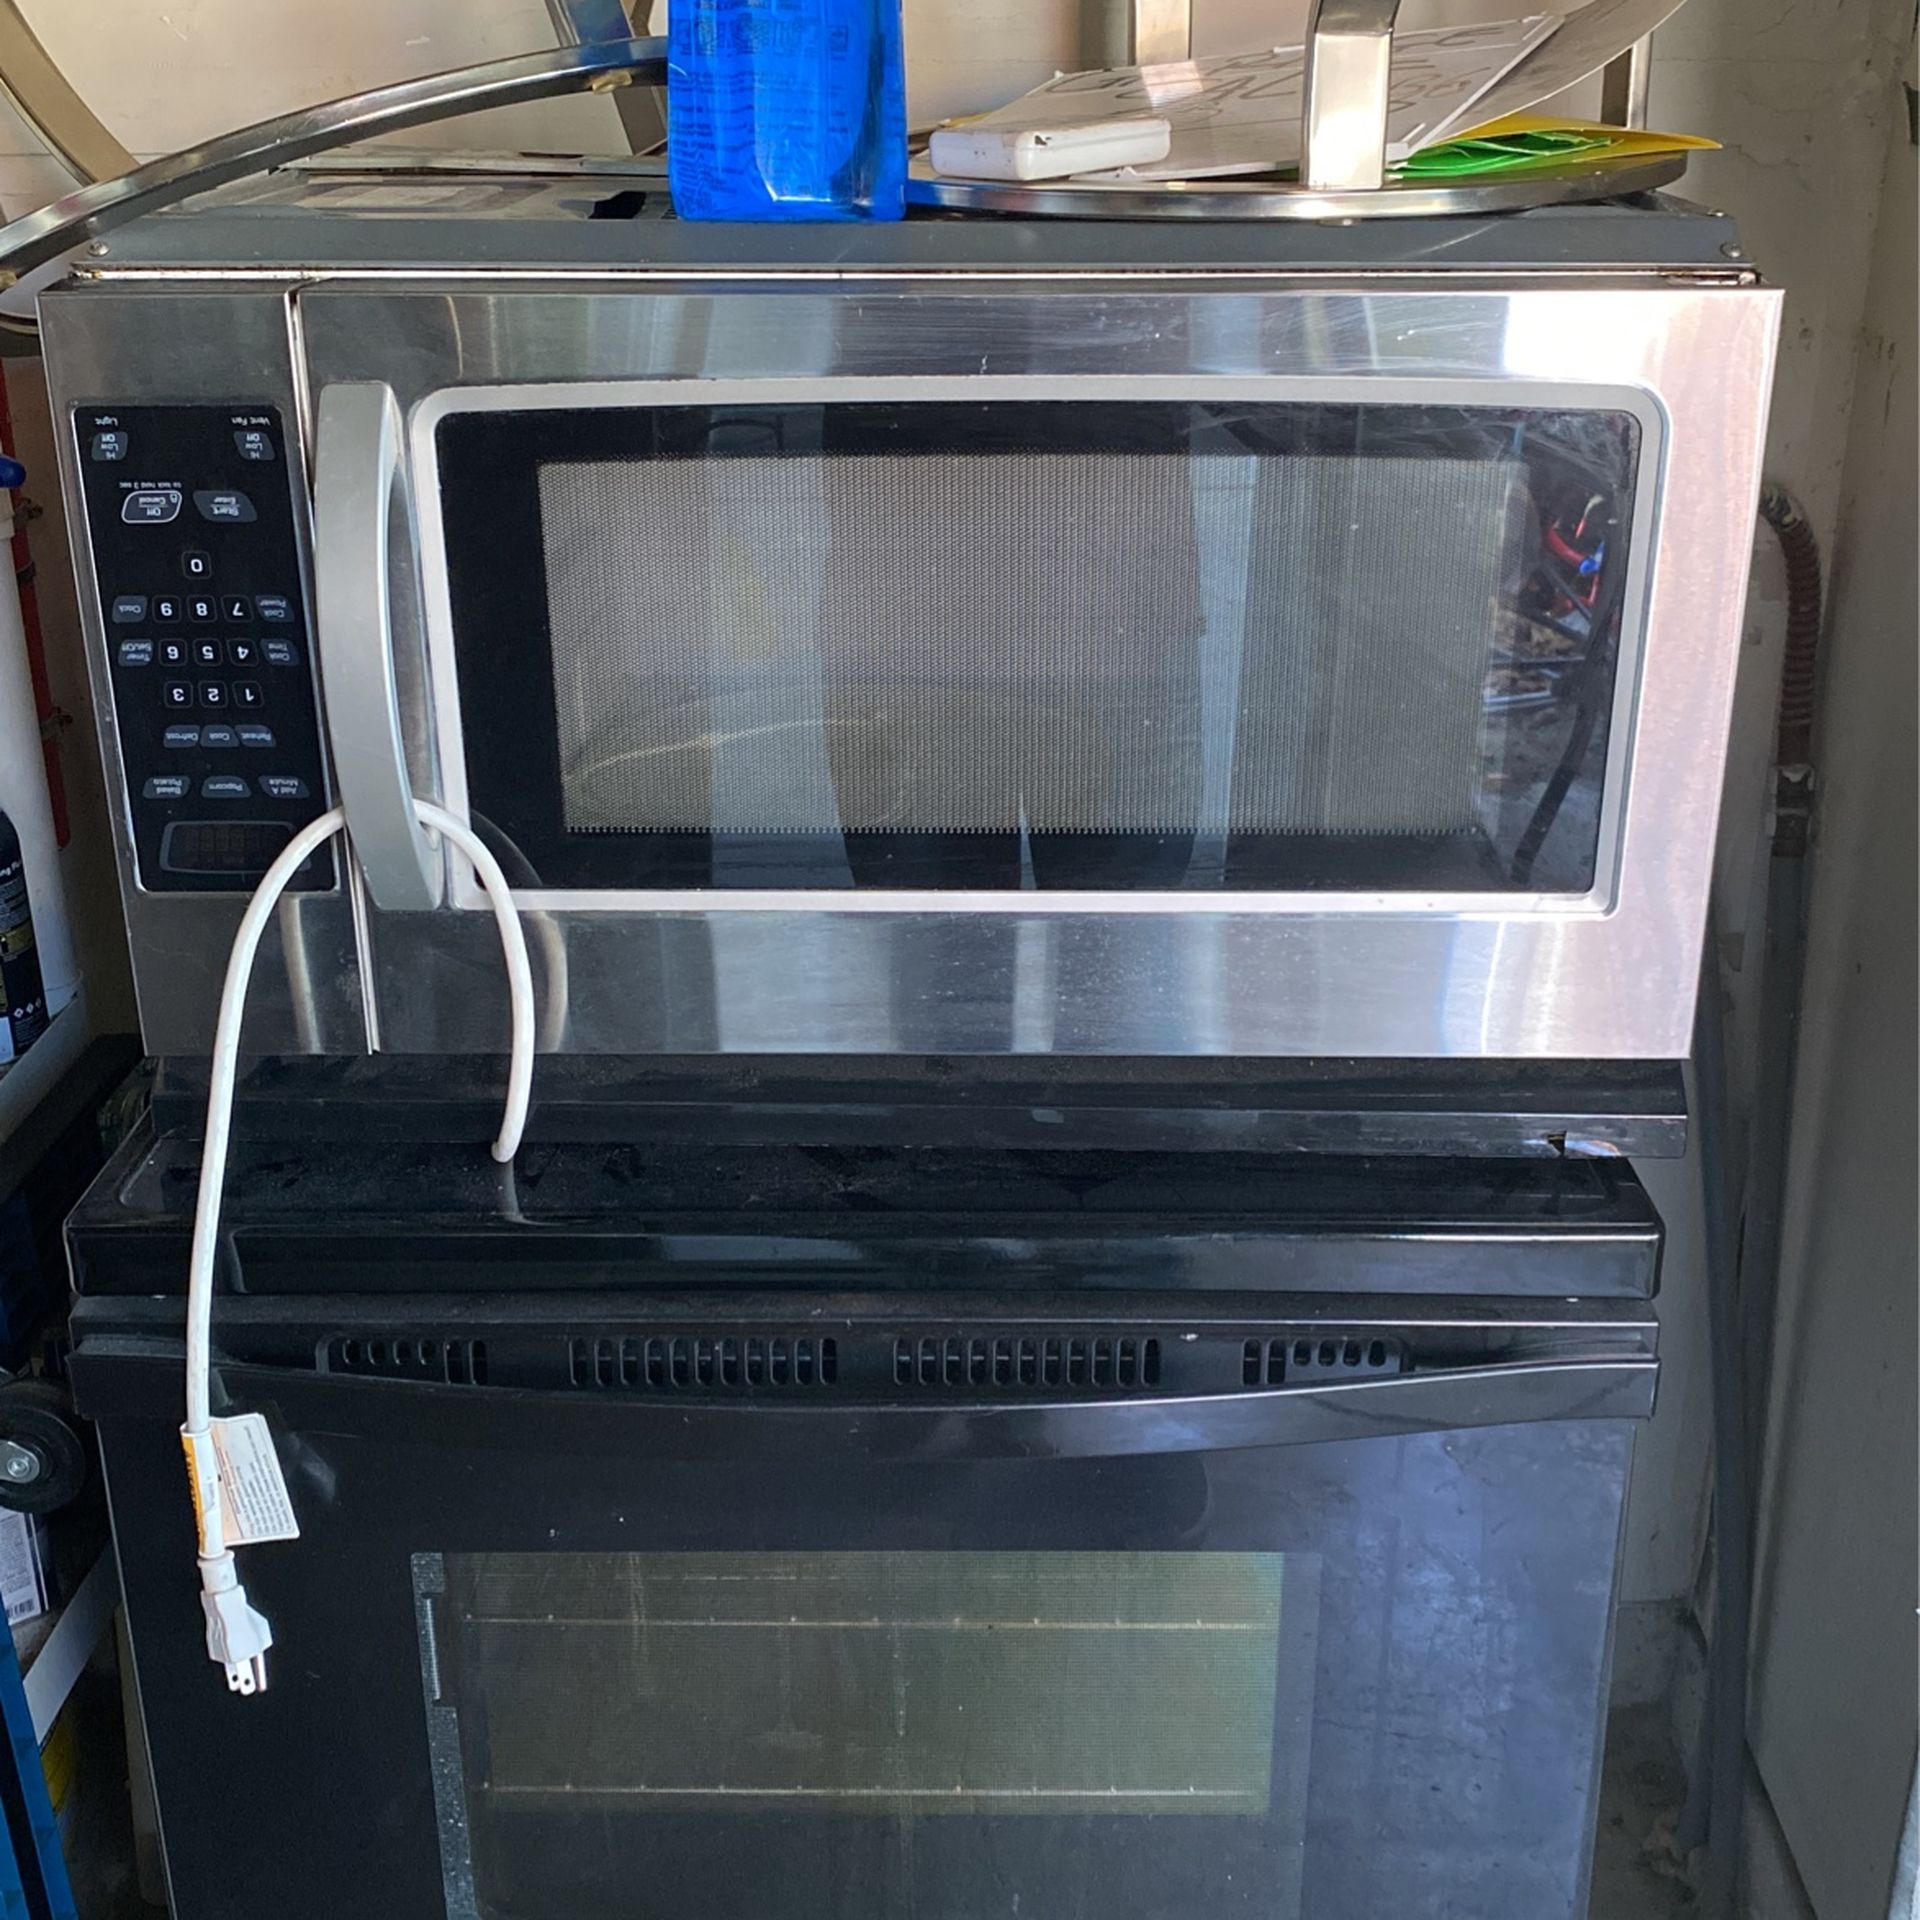 Upper Microwave Stainless Steal